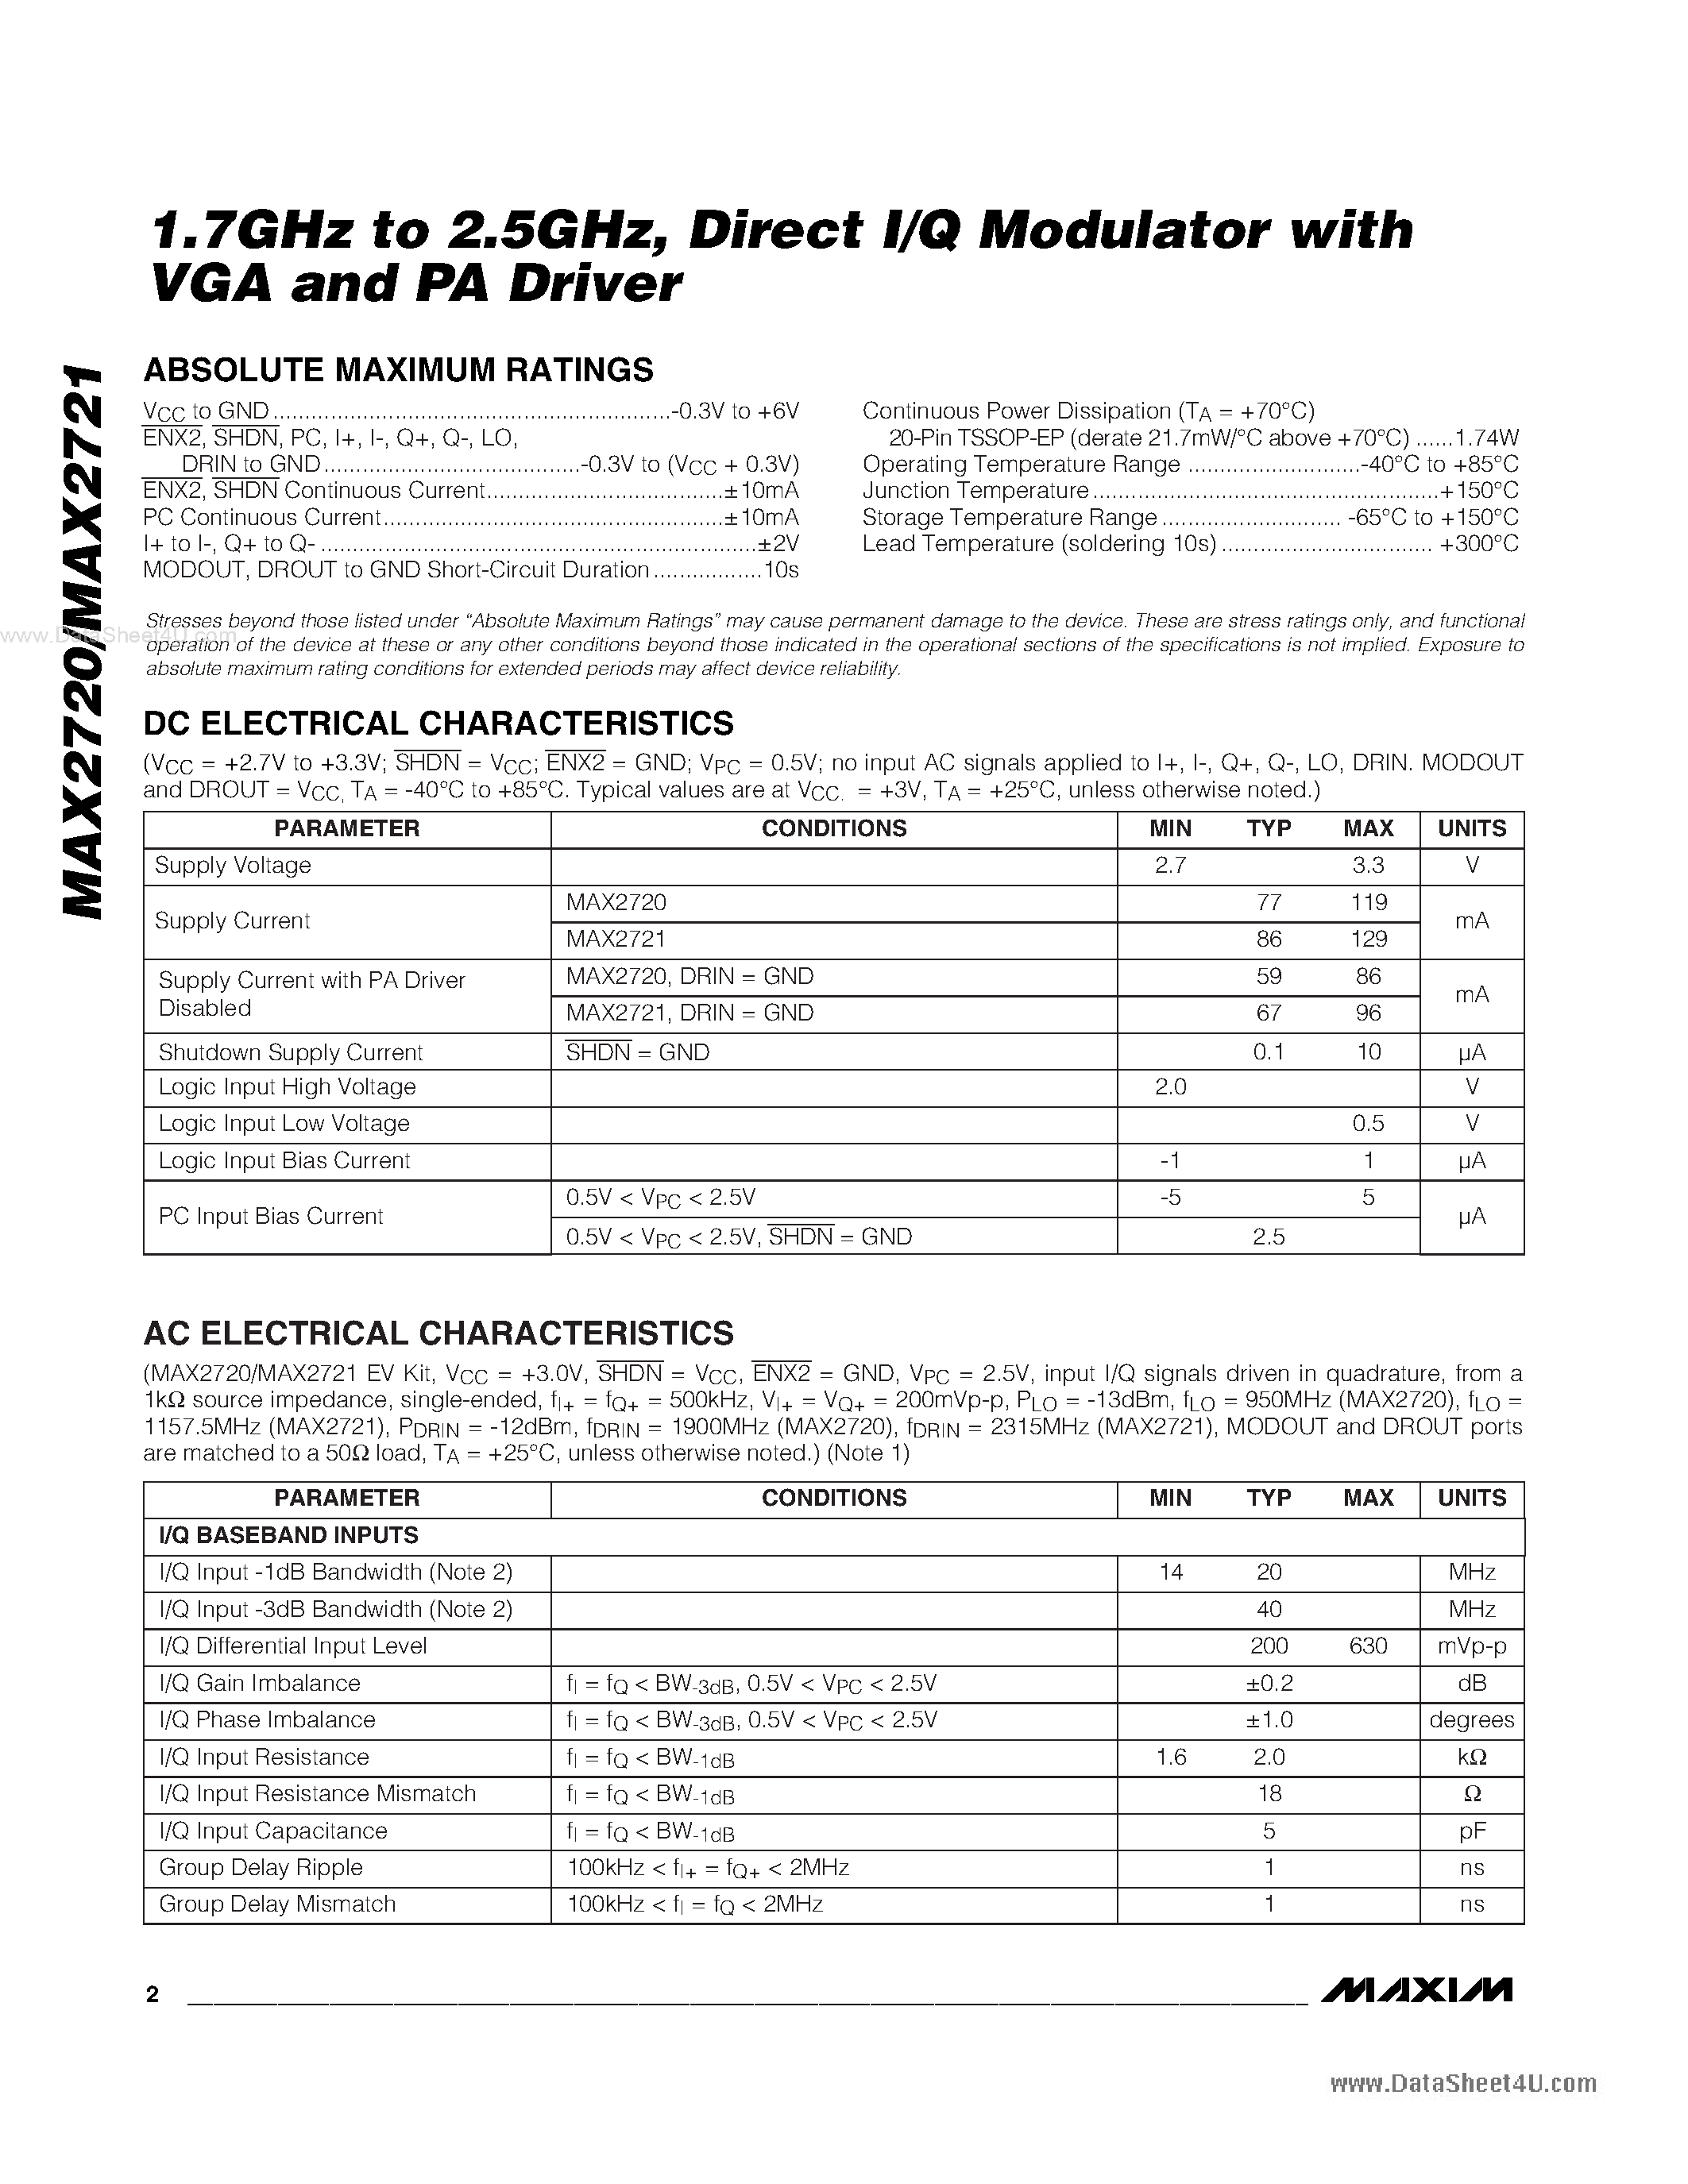 Datasheet MAX2720 - 1.7GHz to 2.5GHz / Direct I/Q Modulator with VGA and PA Driver page 2